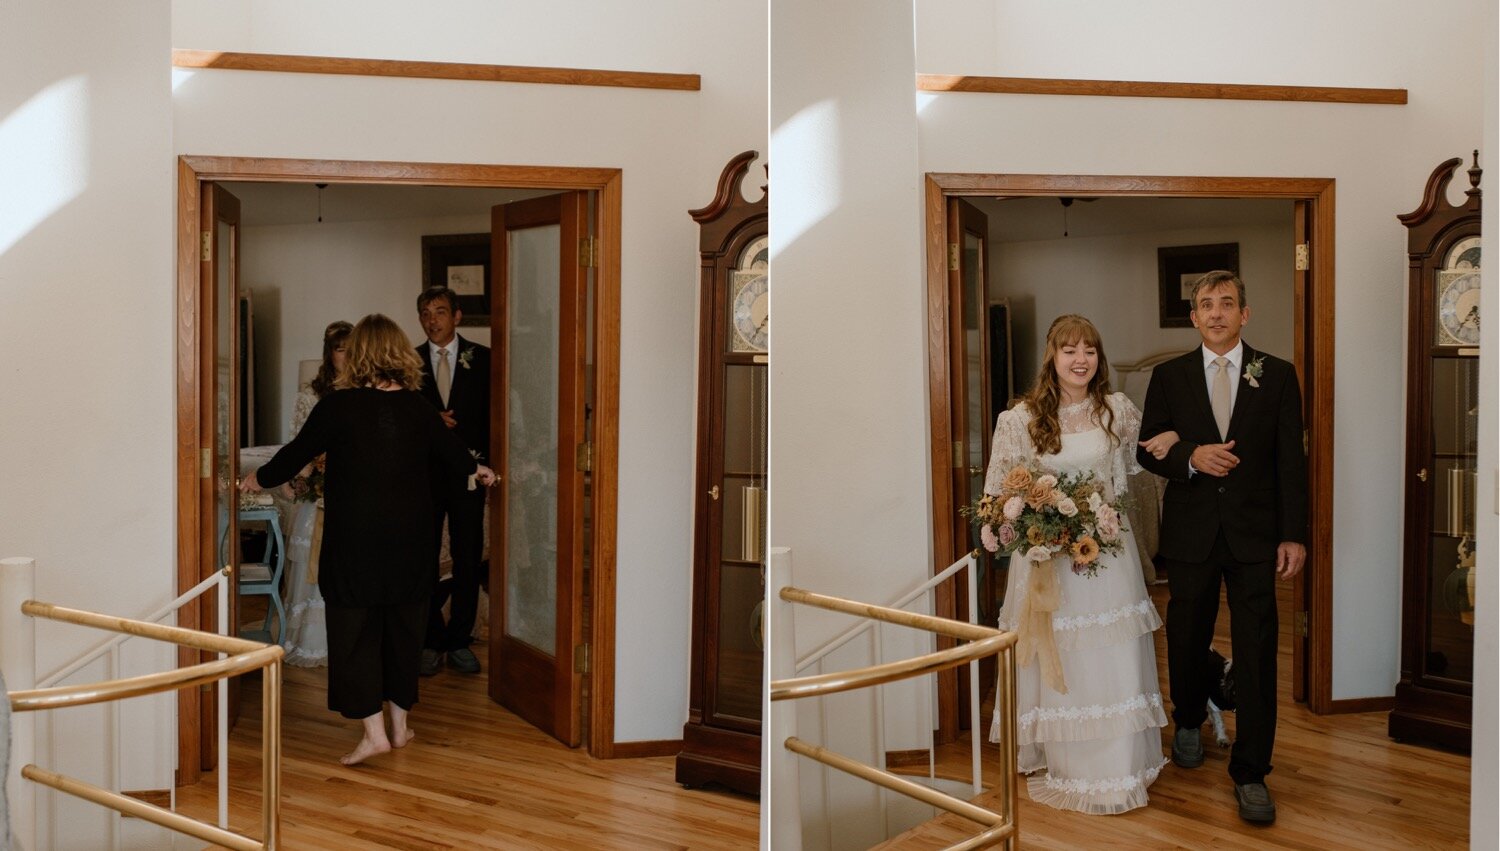 Corry and Michael's Golden Vintage Living Room Wedding  in a Portland Floating House | Oregon Wedding Photographer